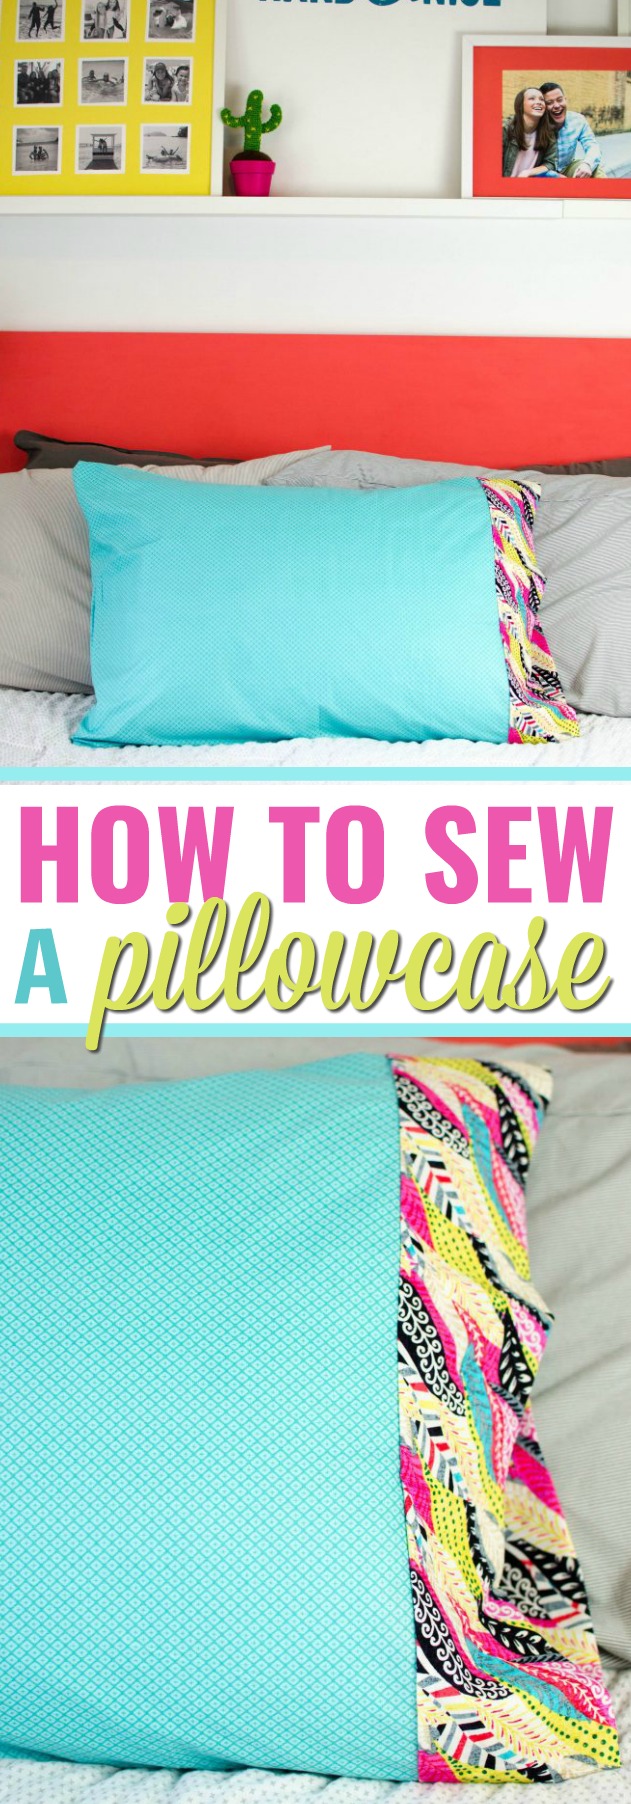 how to sew a pillowcase